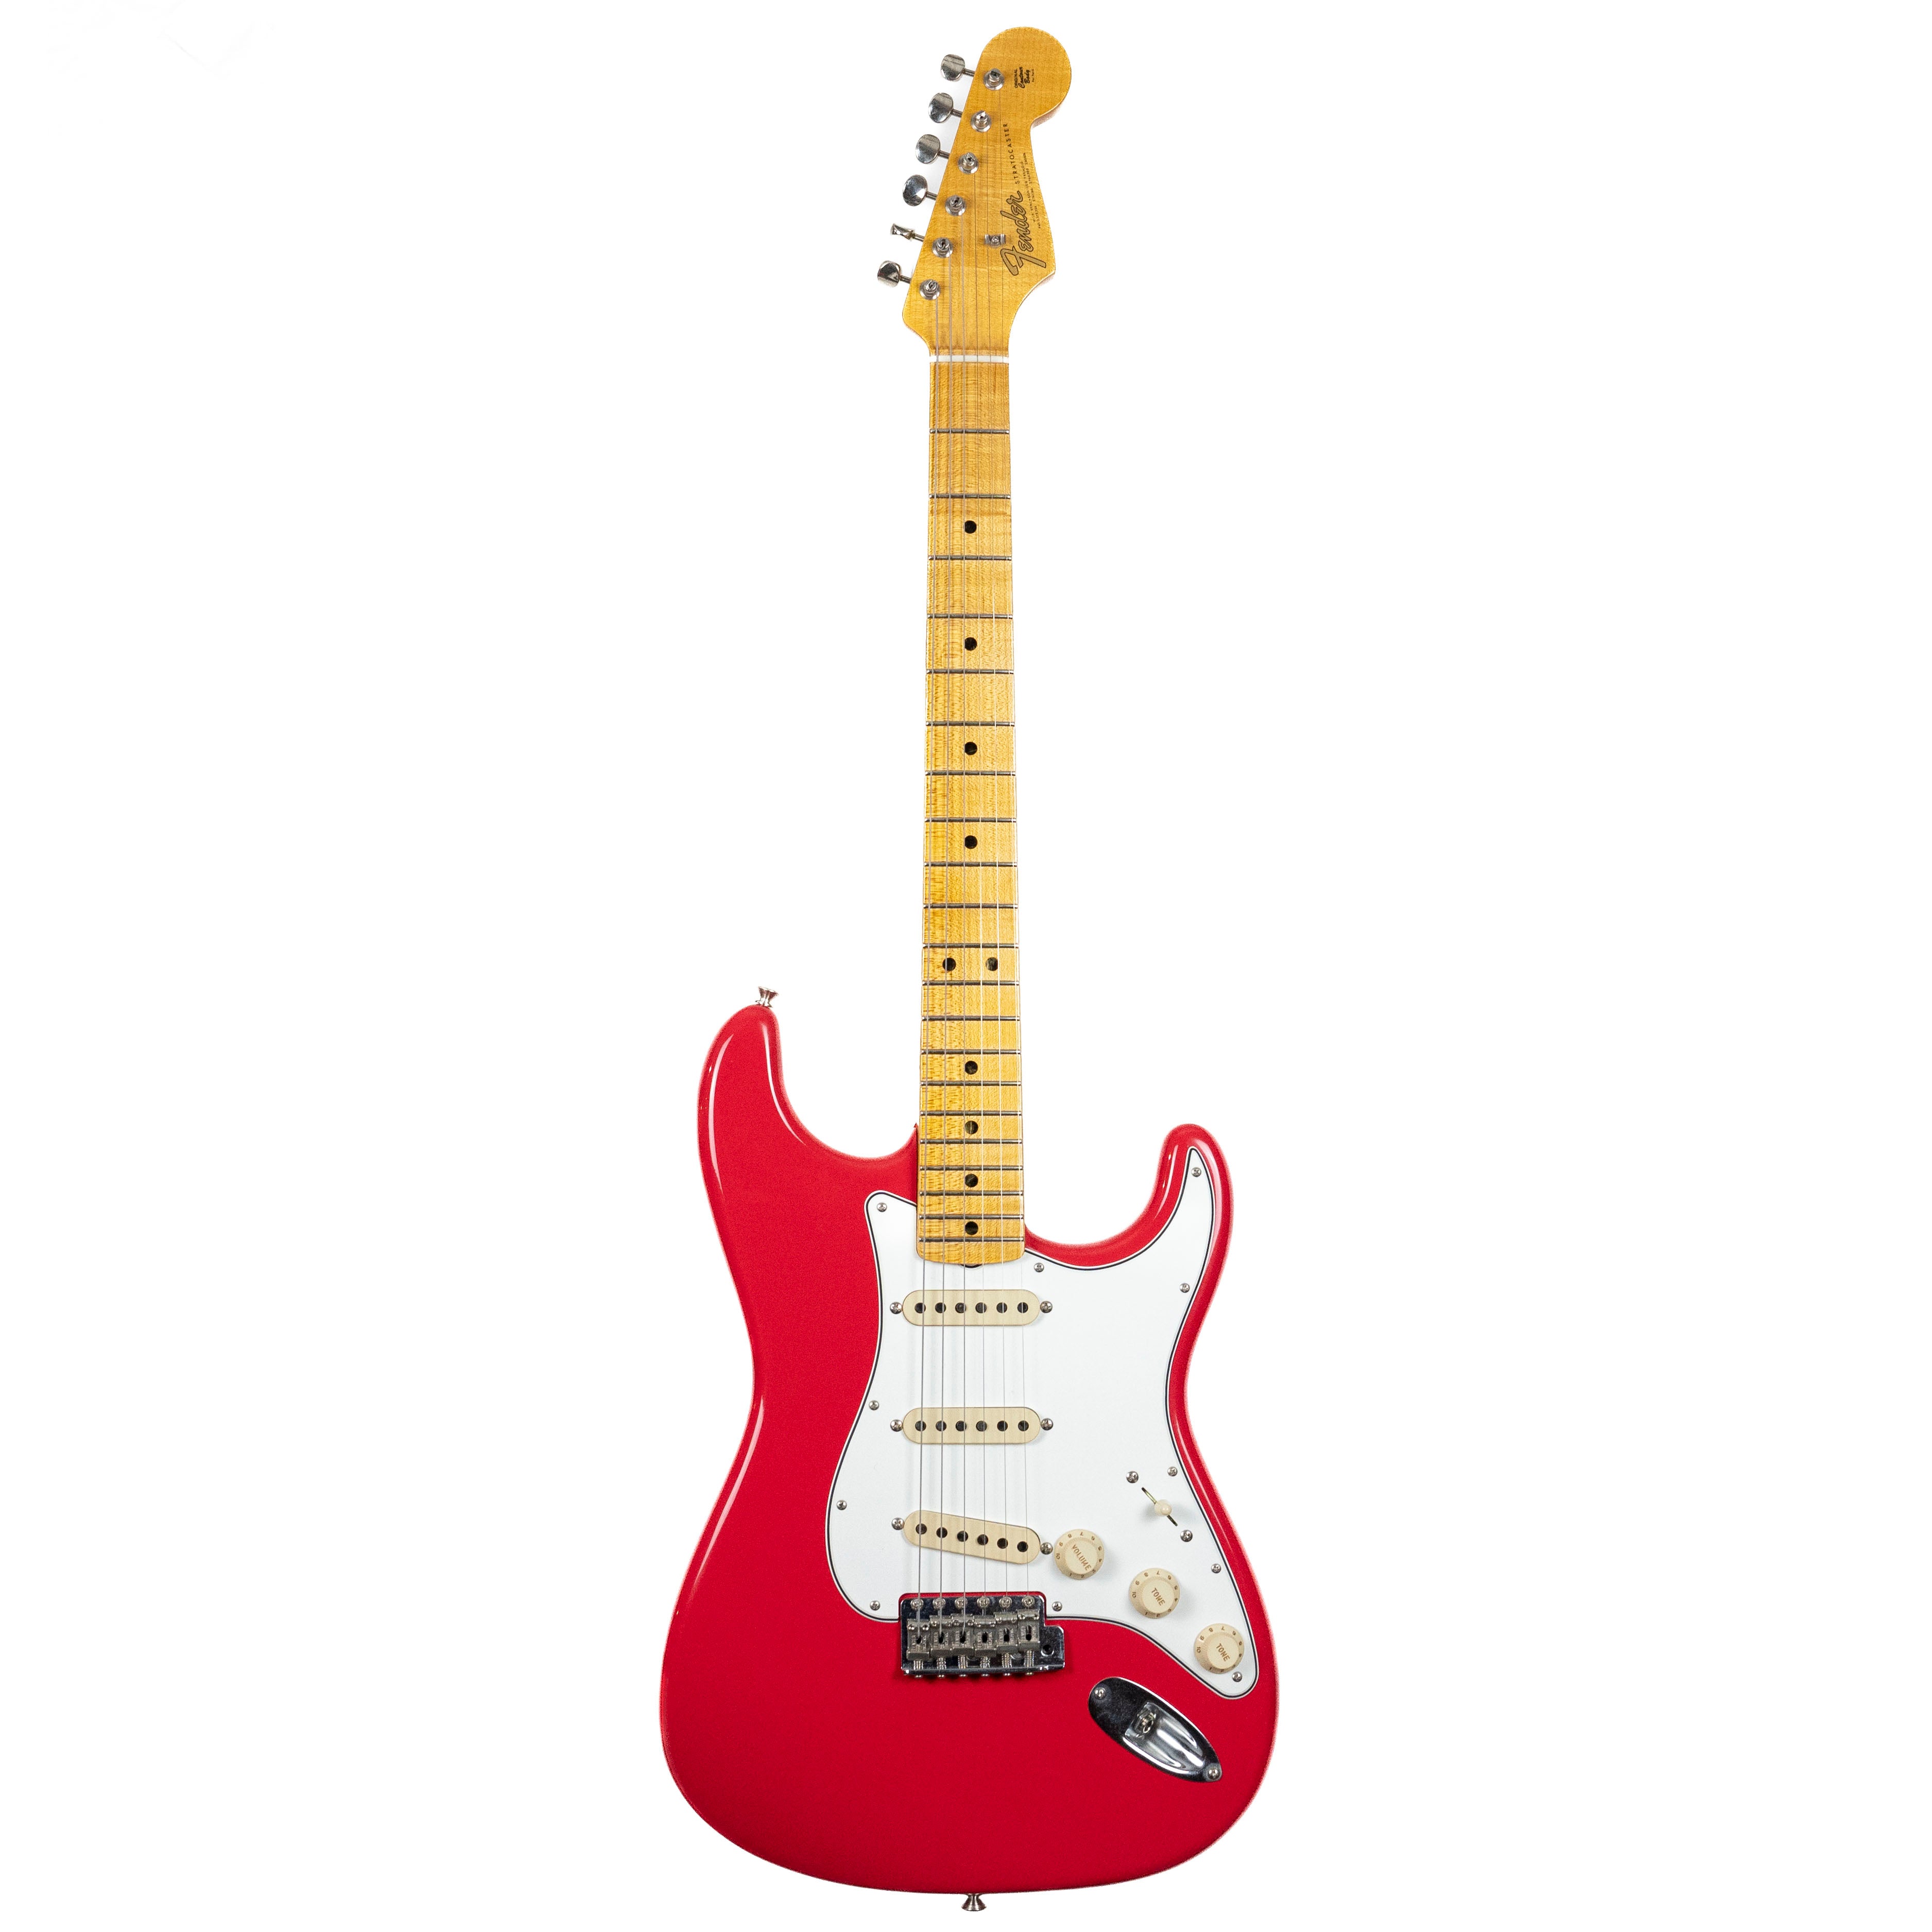 Fender 2020 "Wildwood 10" '65 Custom Shop Stratocaster Hot Rod Red "Relic Ready"